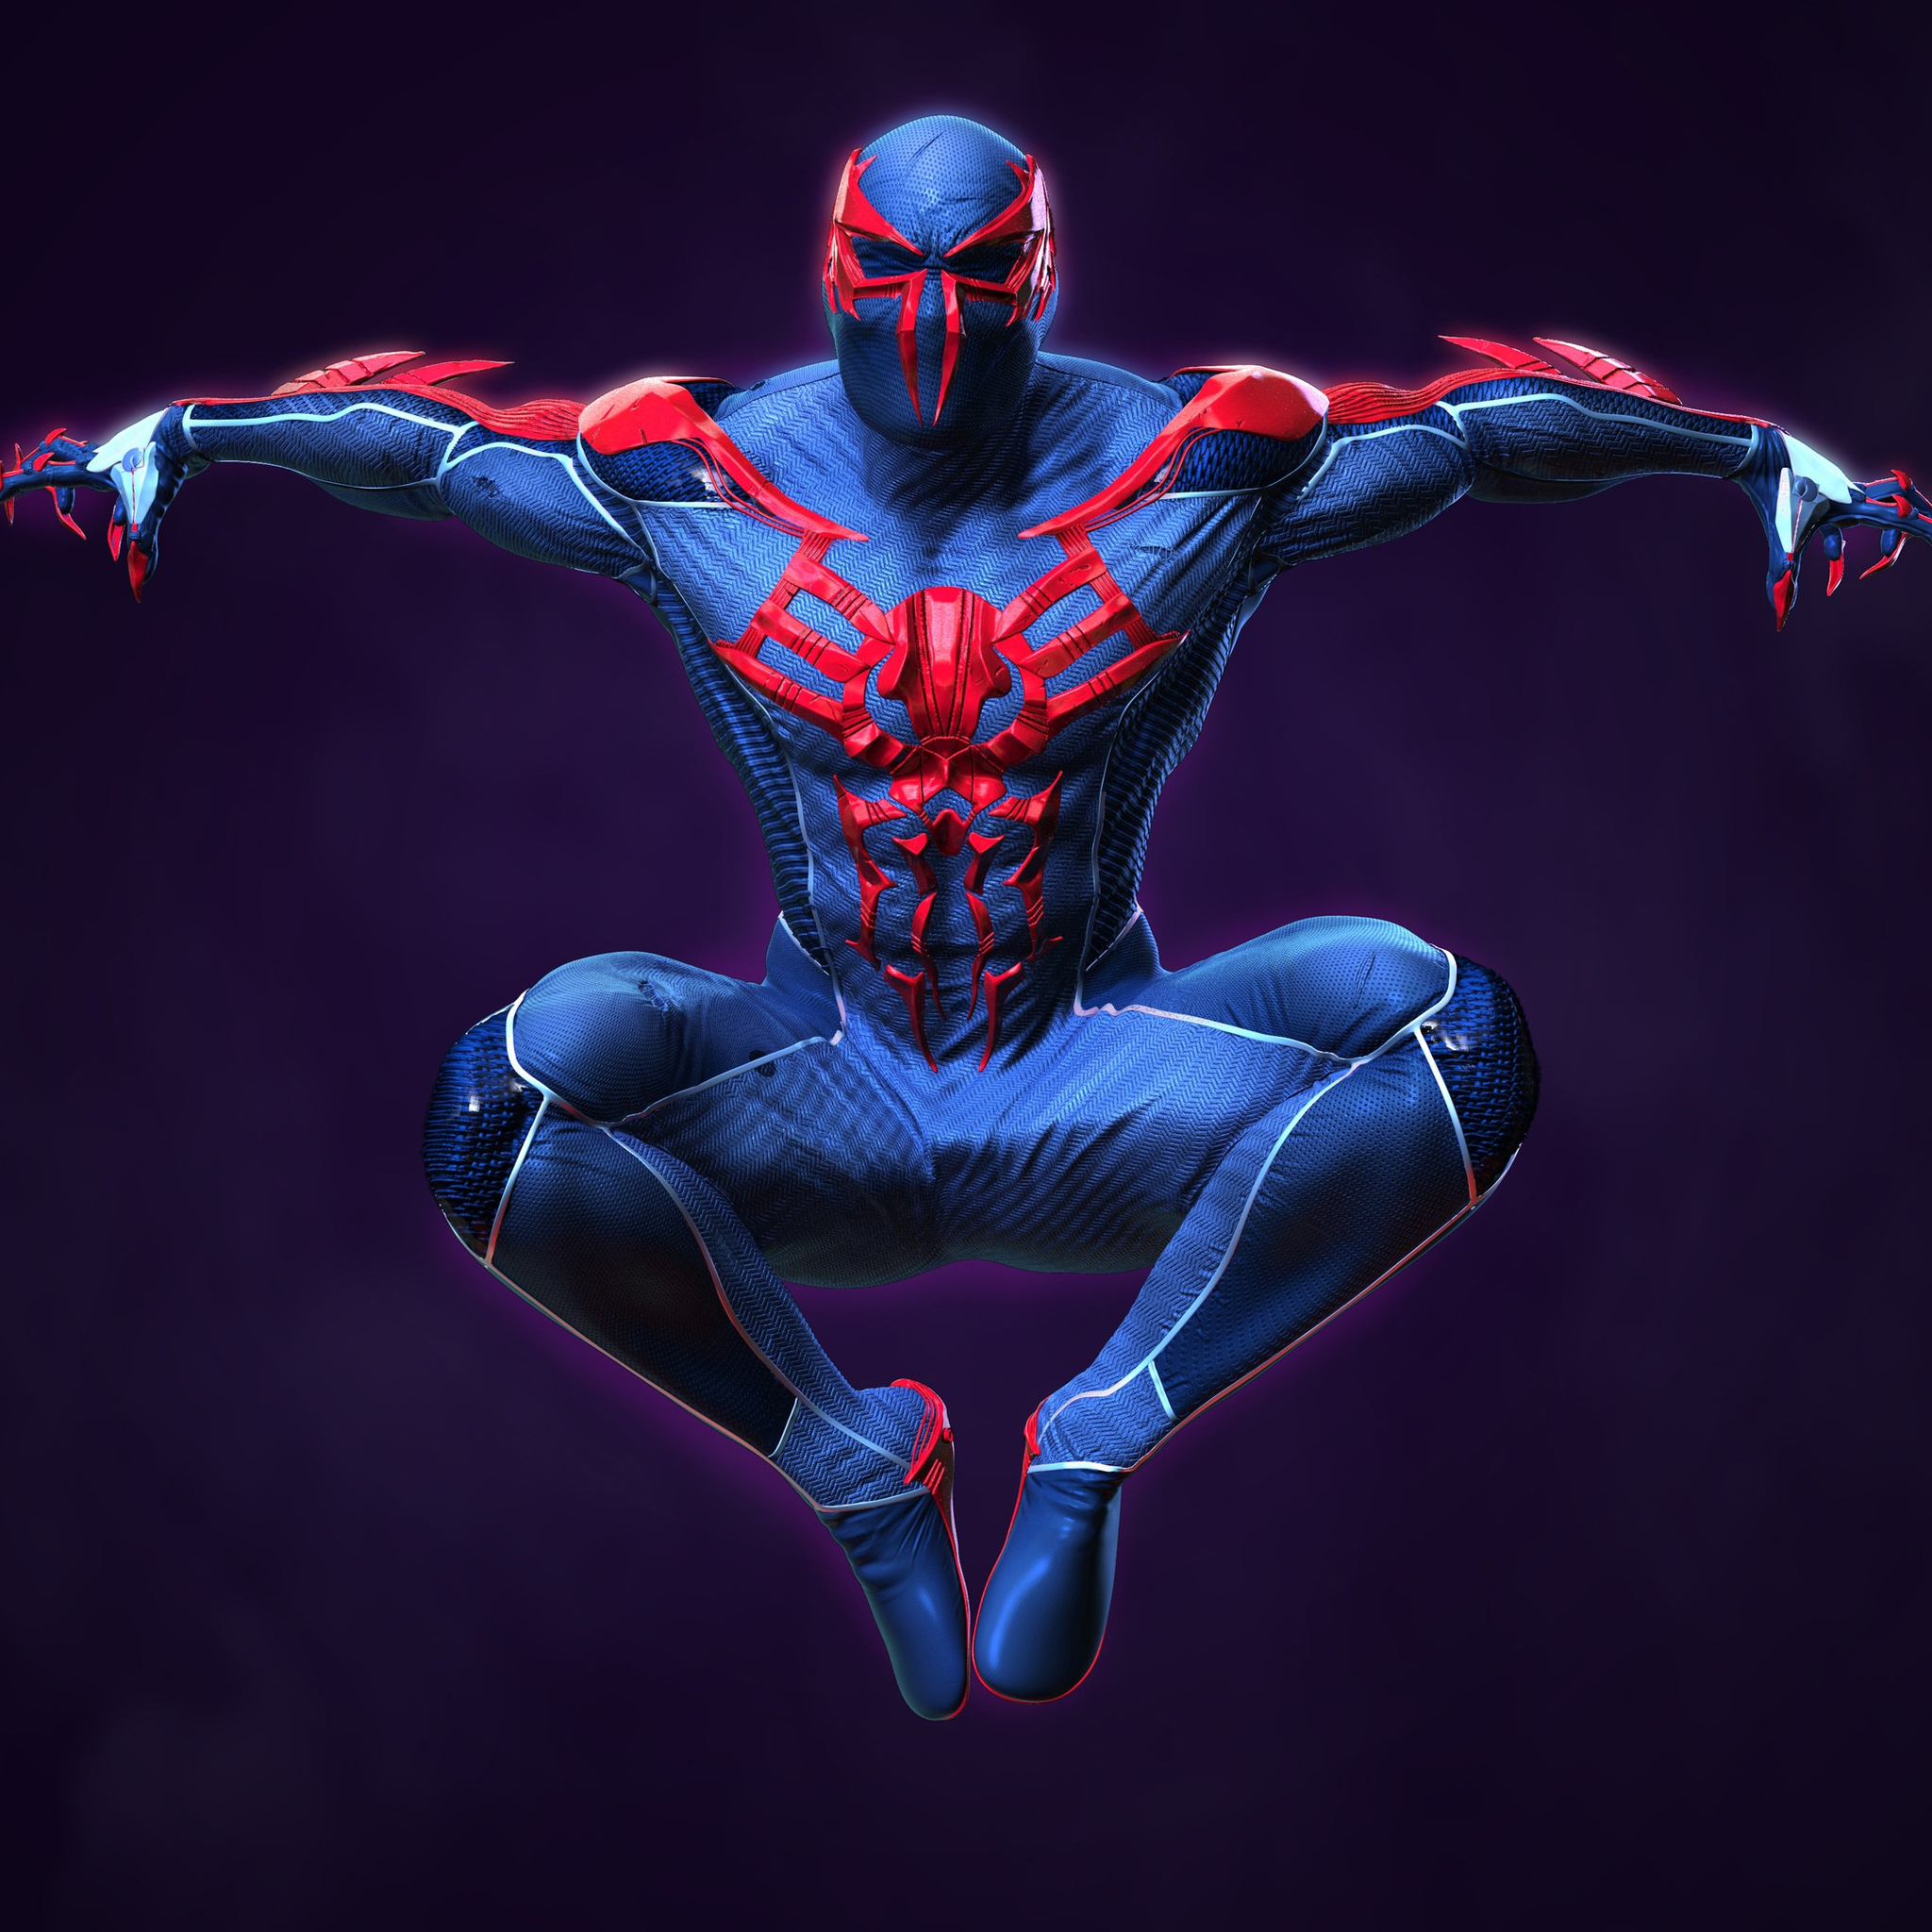 2048x2048 4k Spider Man 2099 Ipad Air HD 4k Wallpapers, Images